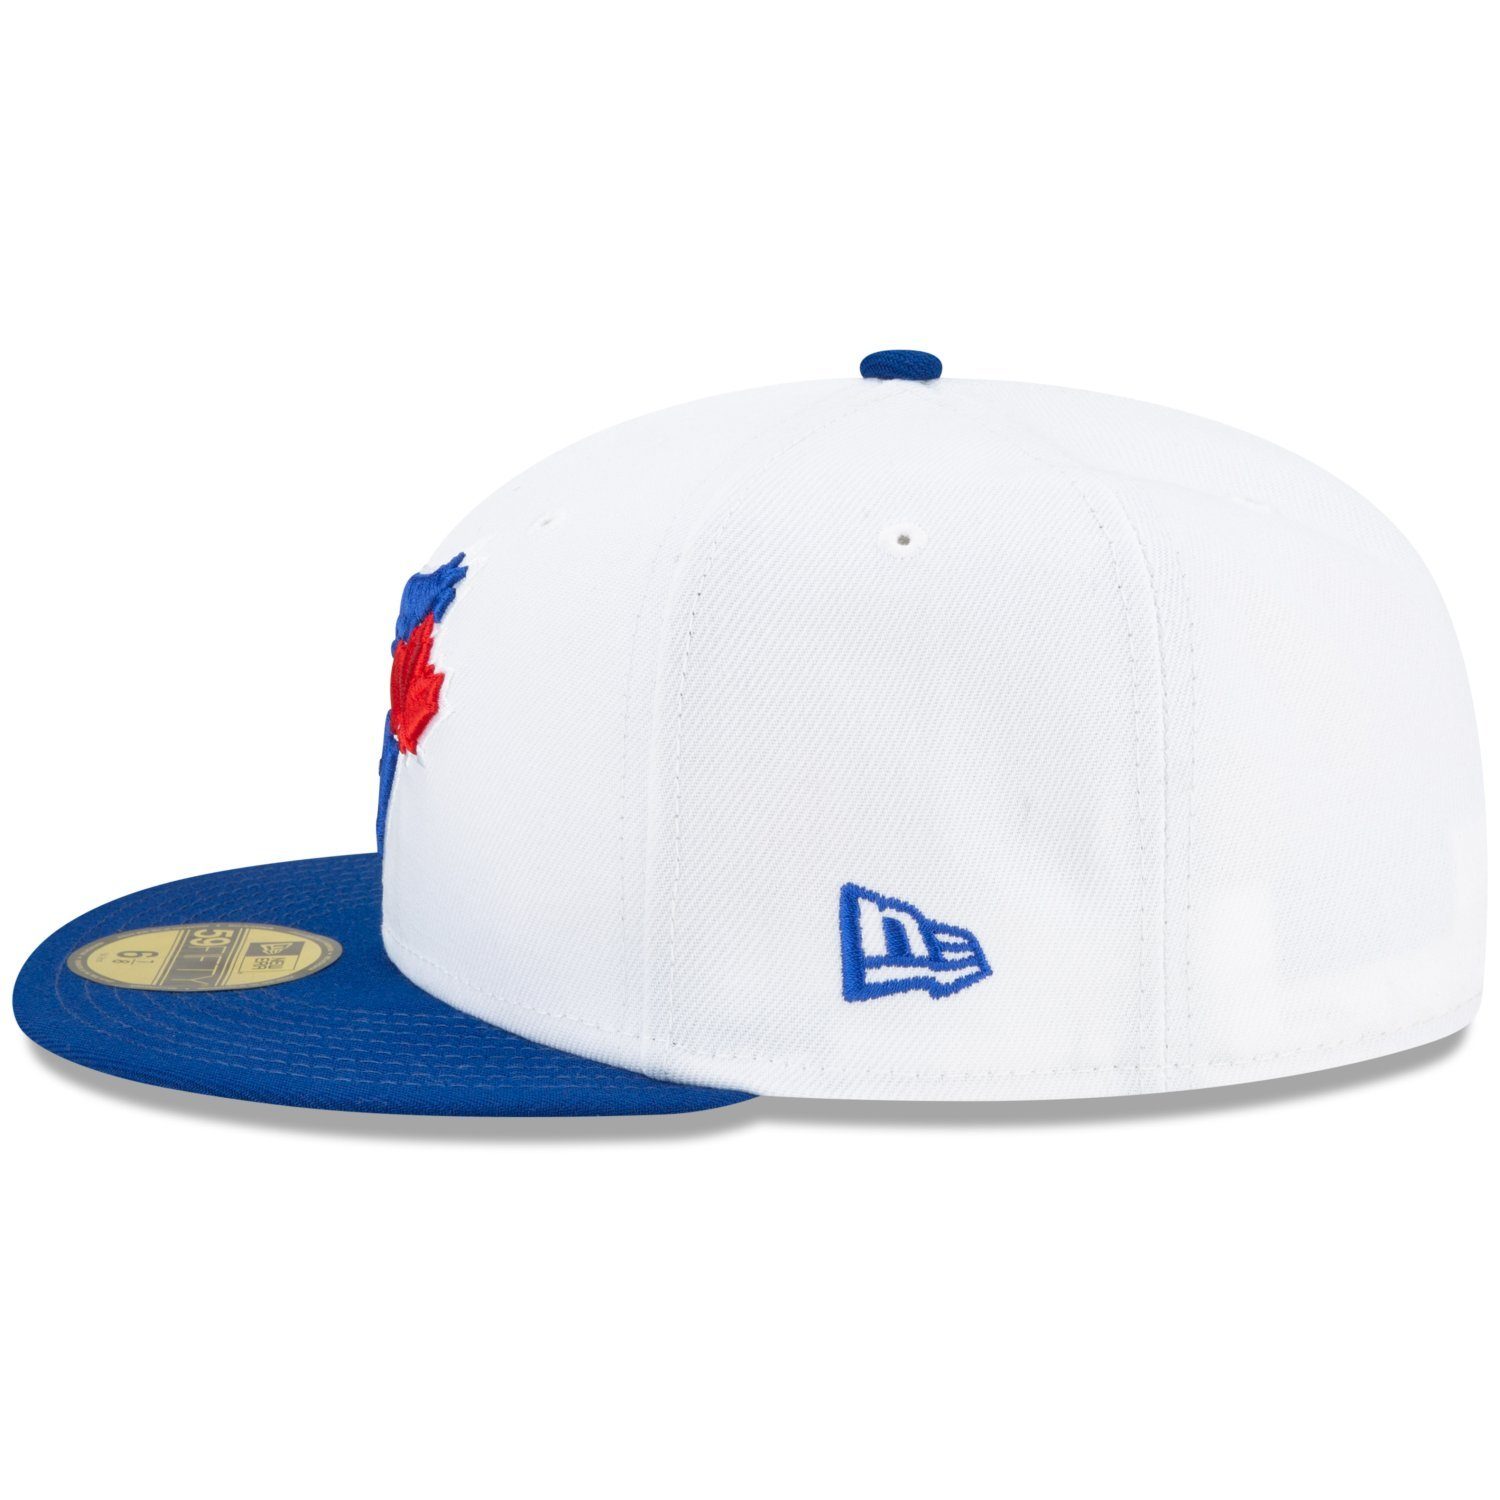 New Era Fitted Cap WORLD Toronto 1993 59Fifty Jays SERIES